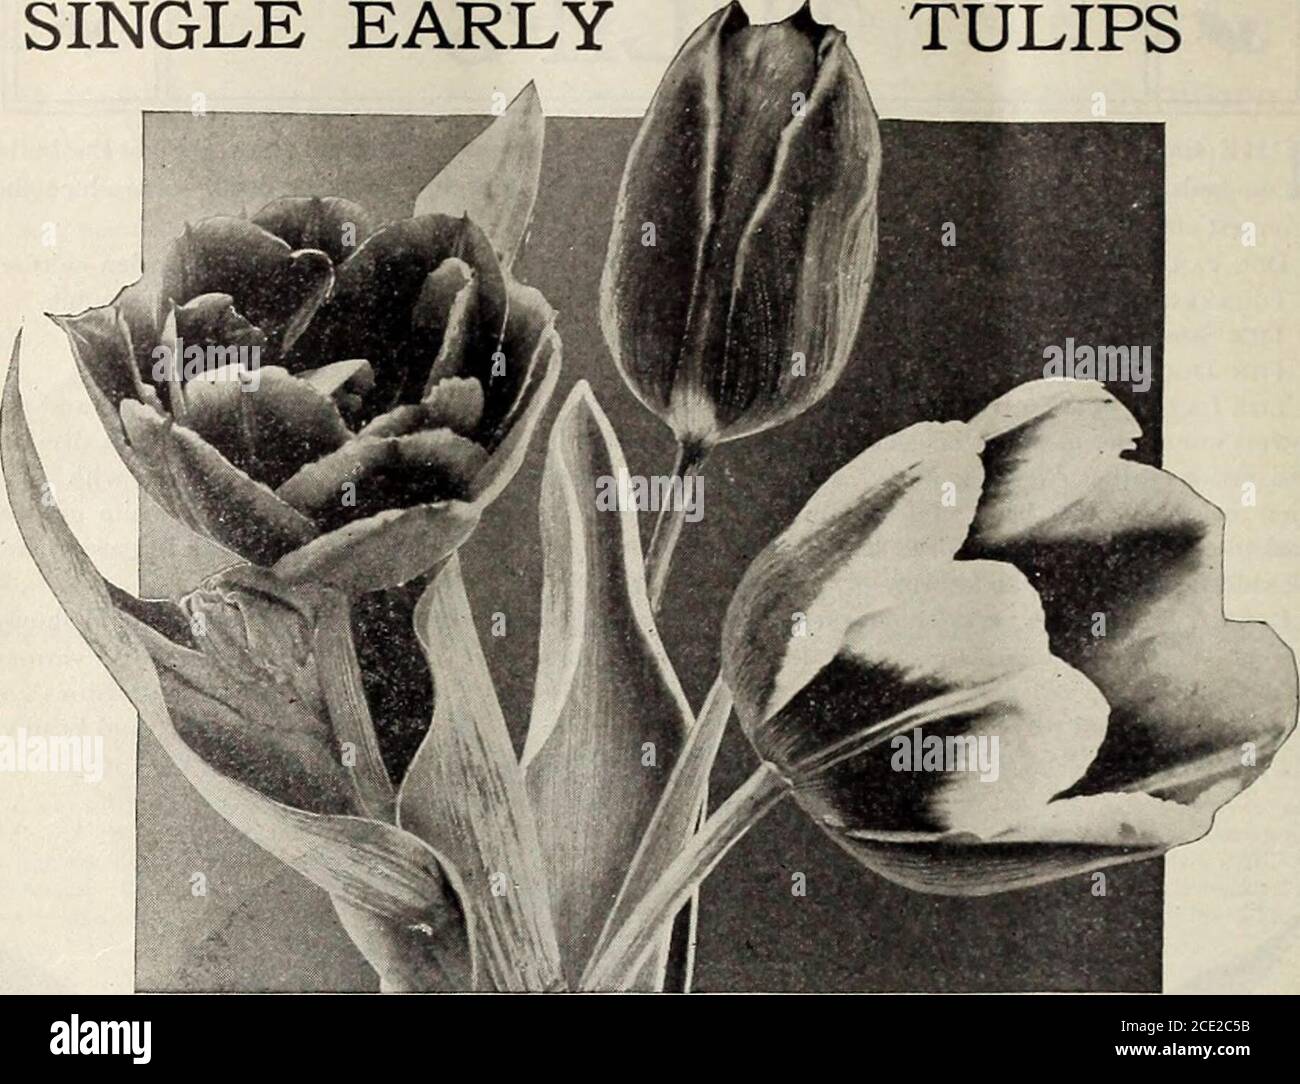 . Vick's garden and floral guide : autumn 1906 . SINGLE EARLY TLI.IP 1.A RK1NE 7 8 Hardy Bulbs for Winter and Spring Blooming SINGLE EARLY TULIPS. DOUBLE TULIPLEONARDO DA VINCI SINGLE EARLY TULIPSPROSERPINE DUCHESSE DE PARMA Comprising the finest selections for forcing and bedding.Varieties marked E are the earliest to bloom ; Ei, follow- ing ; E2, the latest. DOZ. 100 Artus. (Ei 1 bright scarlet 3 for 10 3° 1 60 Belle Alliance. (Ei) scarlet °S 45 3 00 Brutus. (Ei)orange-crimson,goId-mar- 3 for 10 35 1 8^5 3 for 10 30 1 75 Chrysolora. (E) yellow 3 for to 25 X 25 Crimson King. (Et) scarlet . . Stock Photo